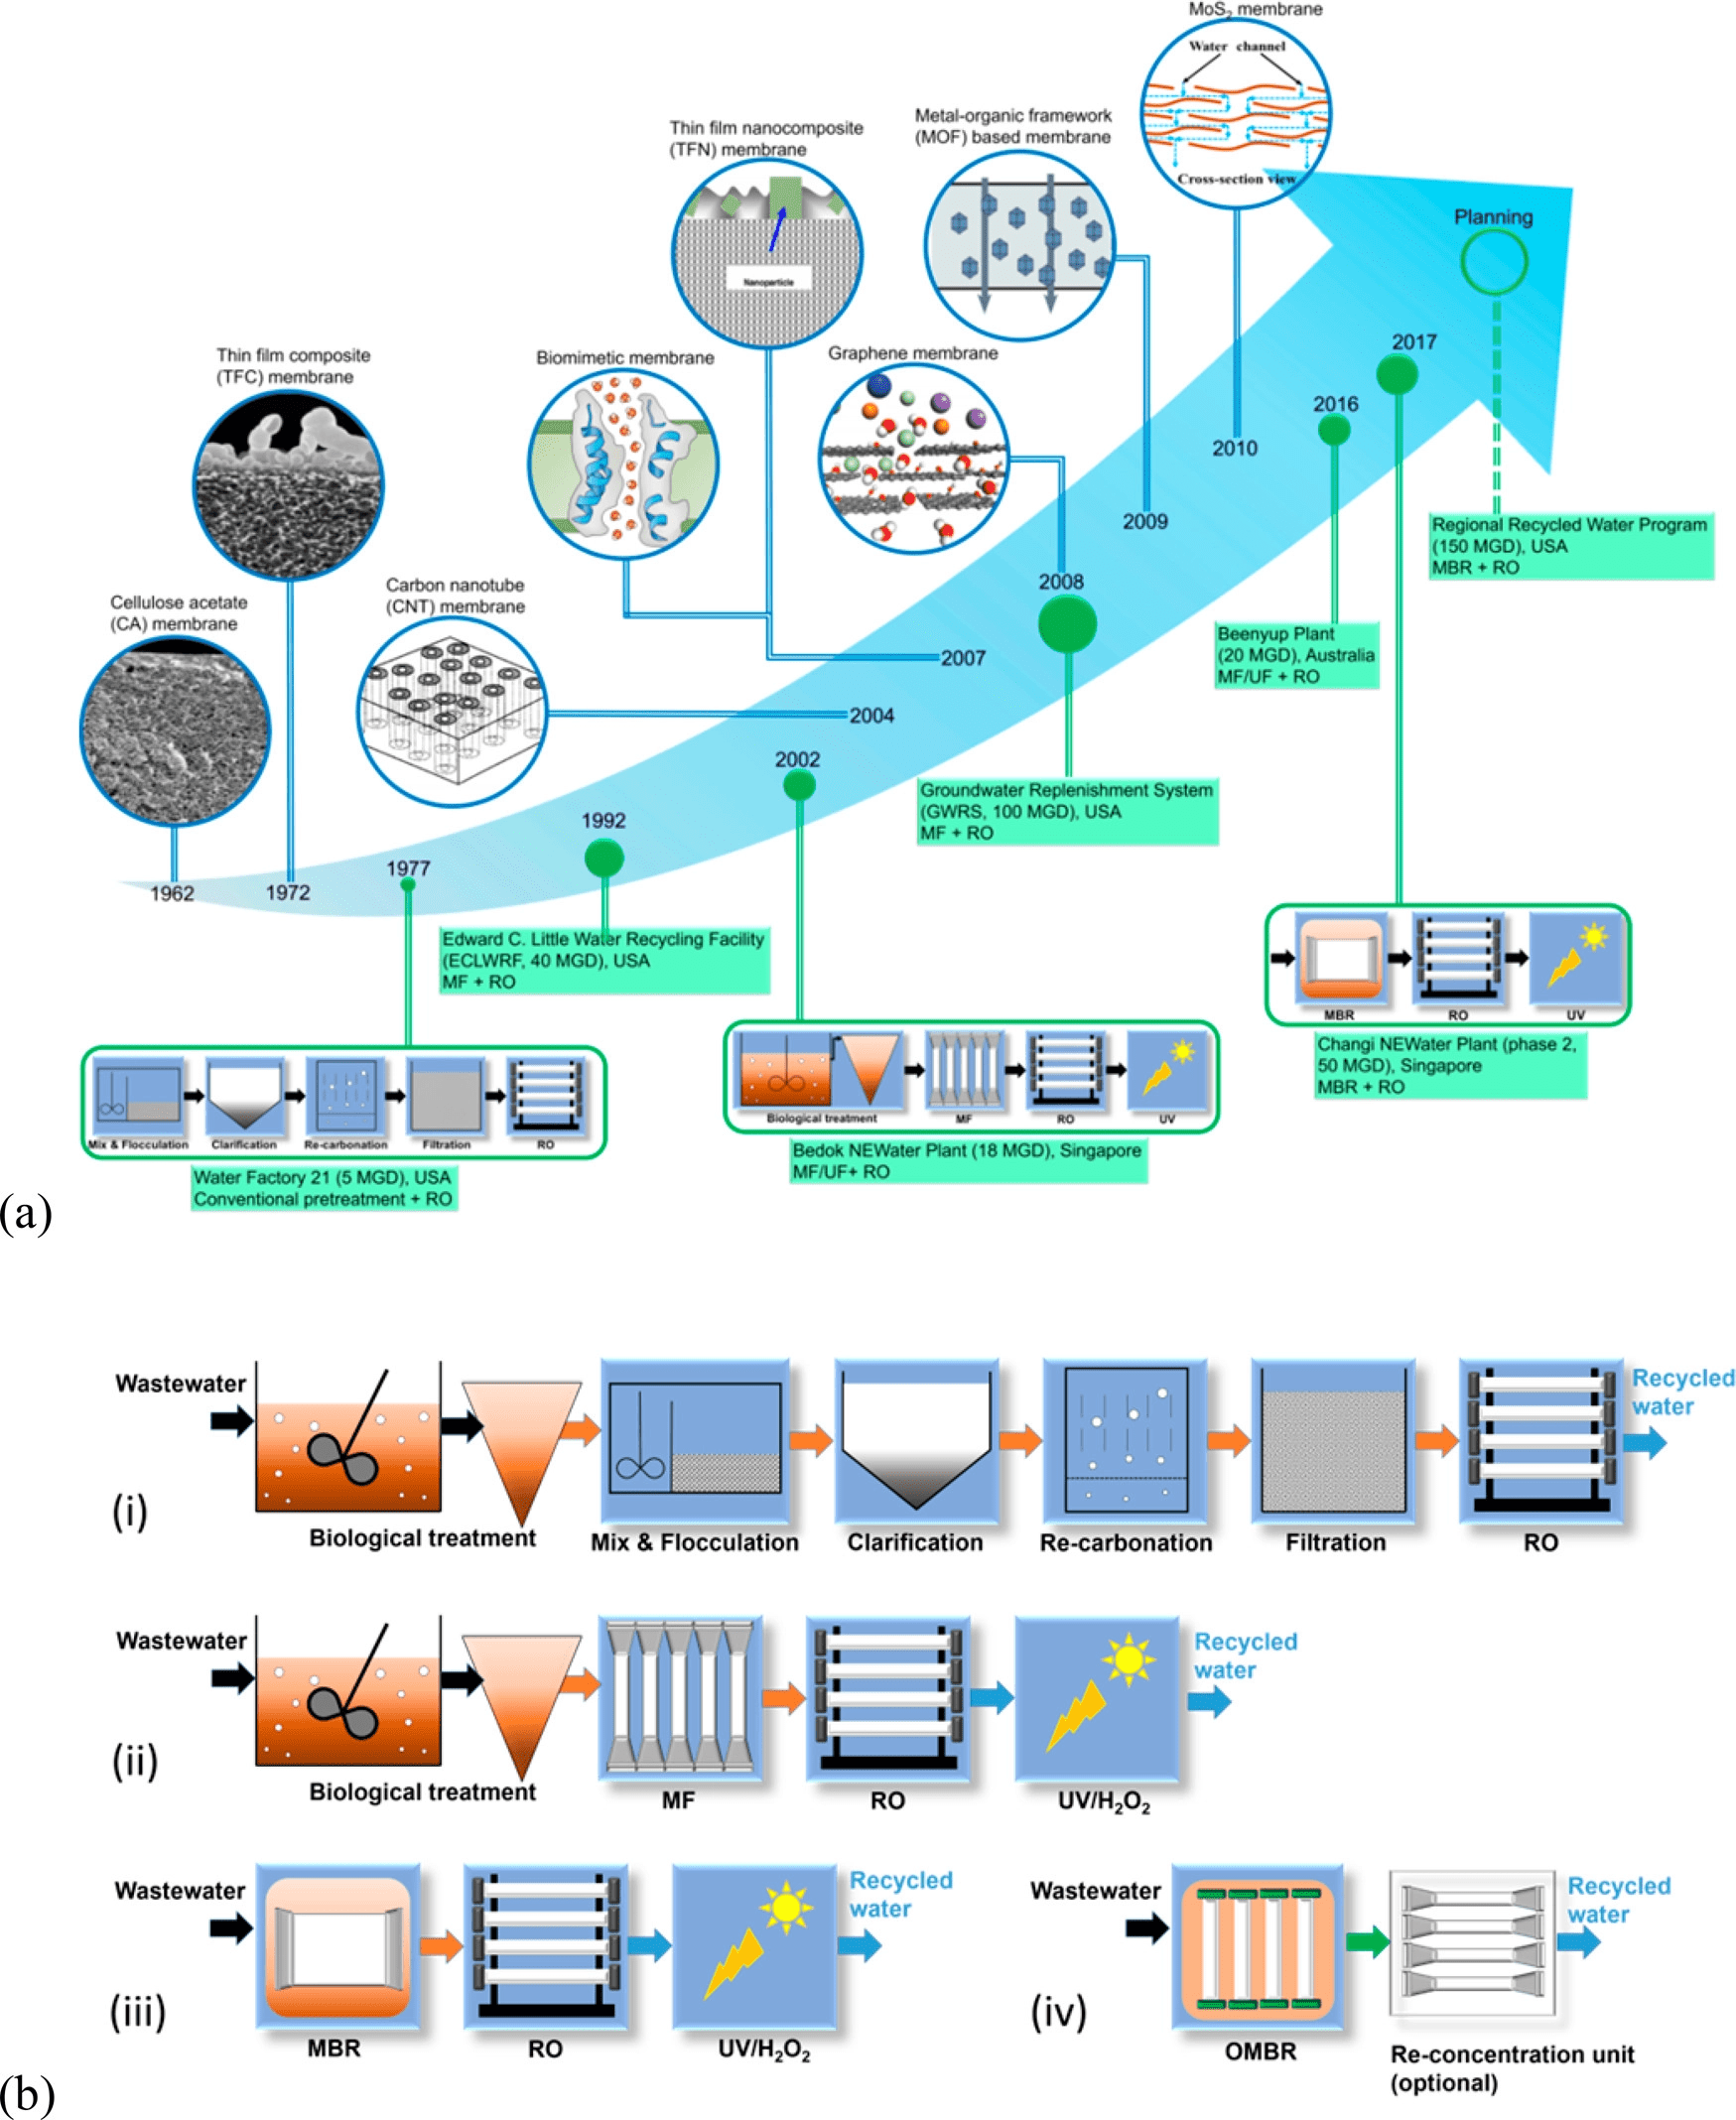 Developments of membrane-based wastewater reuse.